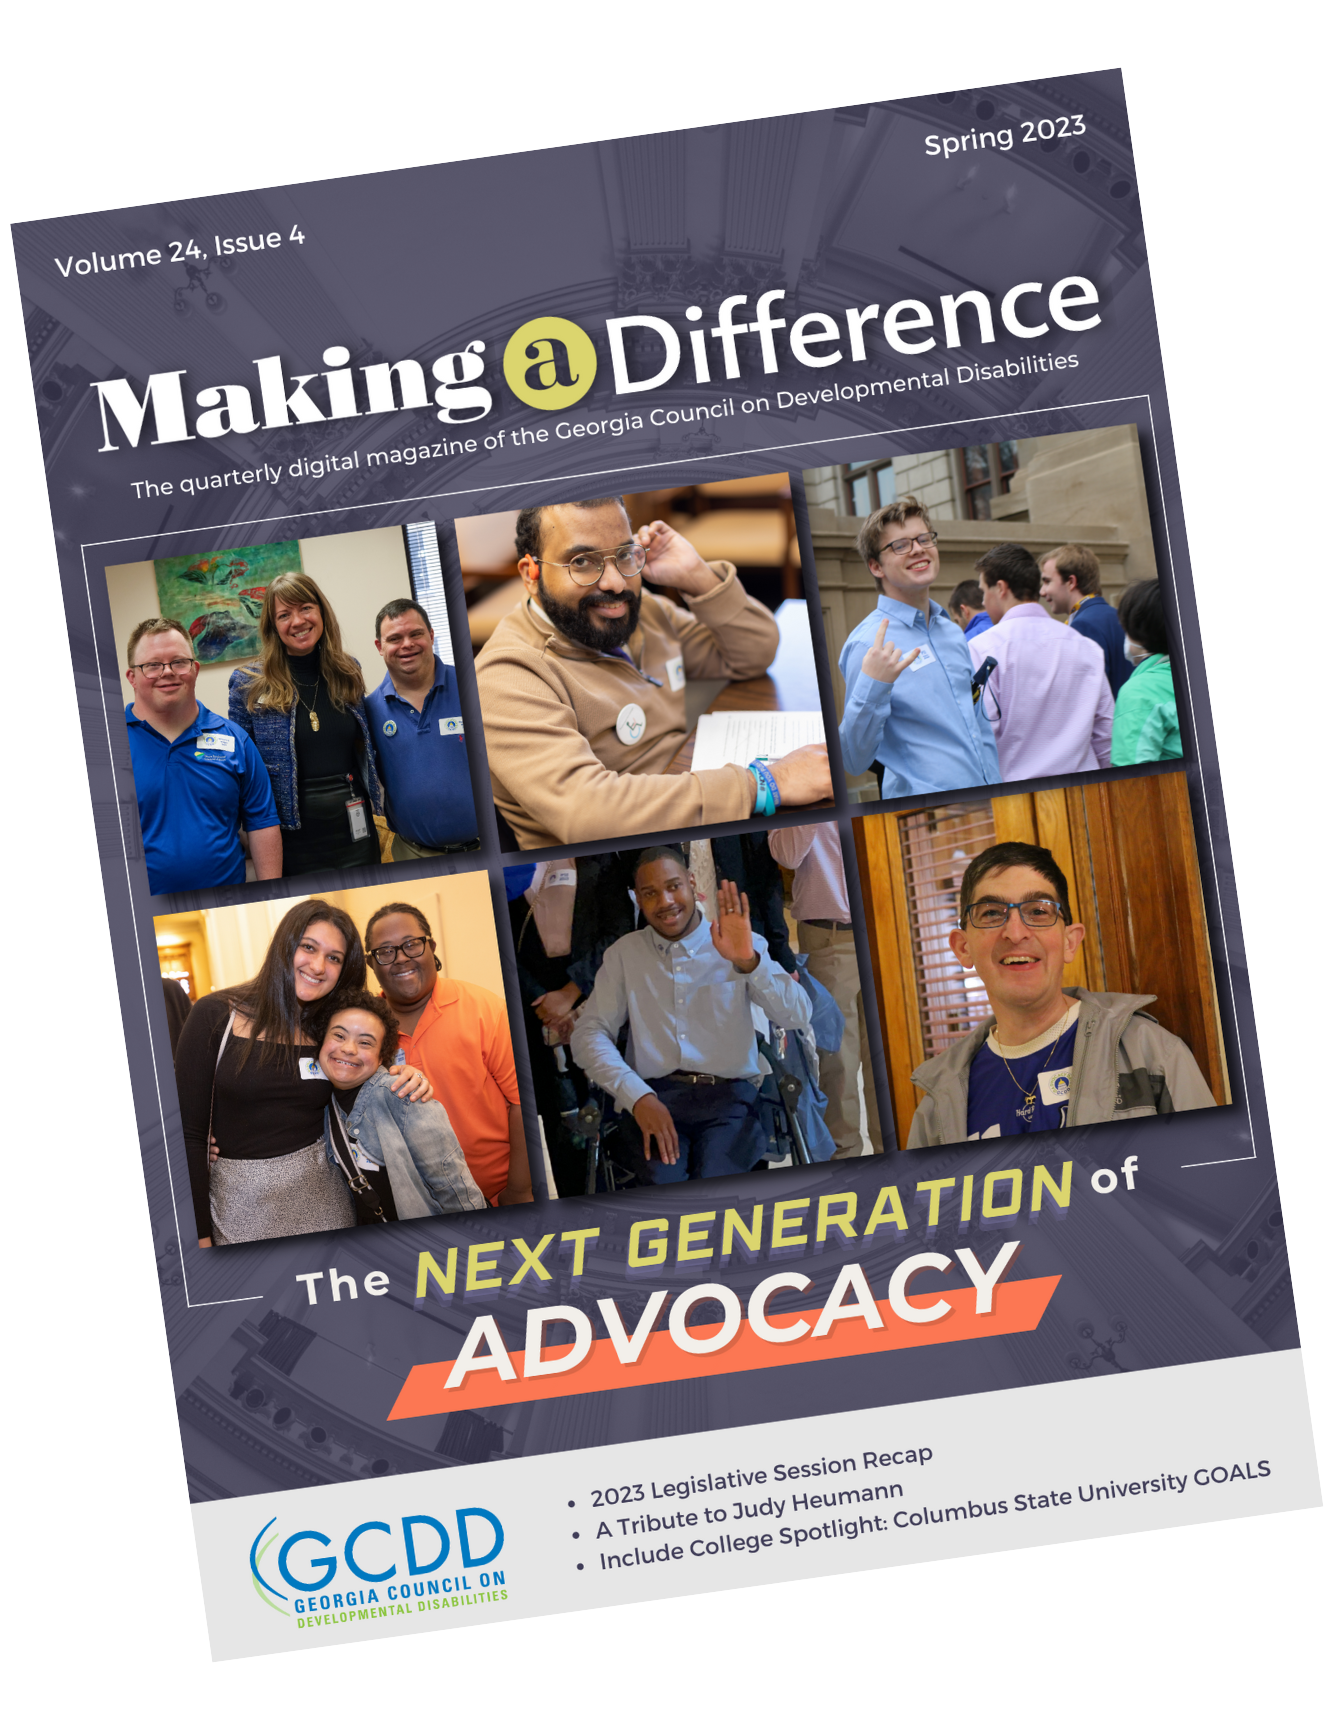 April 2023 Issue, with a collage of pictures from Advocacy Day and a heading that says "The Next Generation of Advocacy"